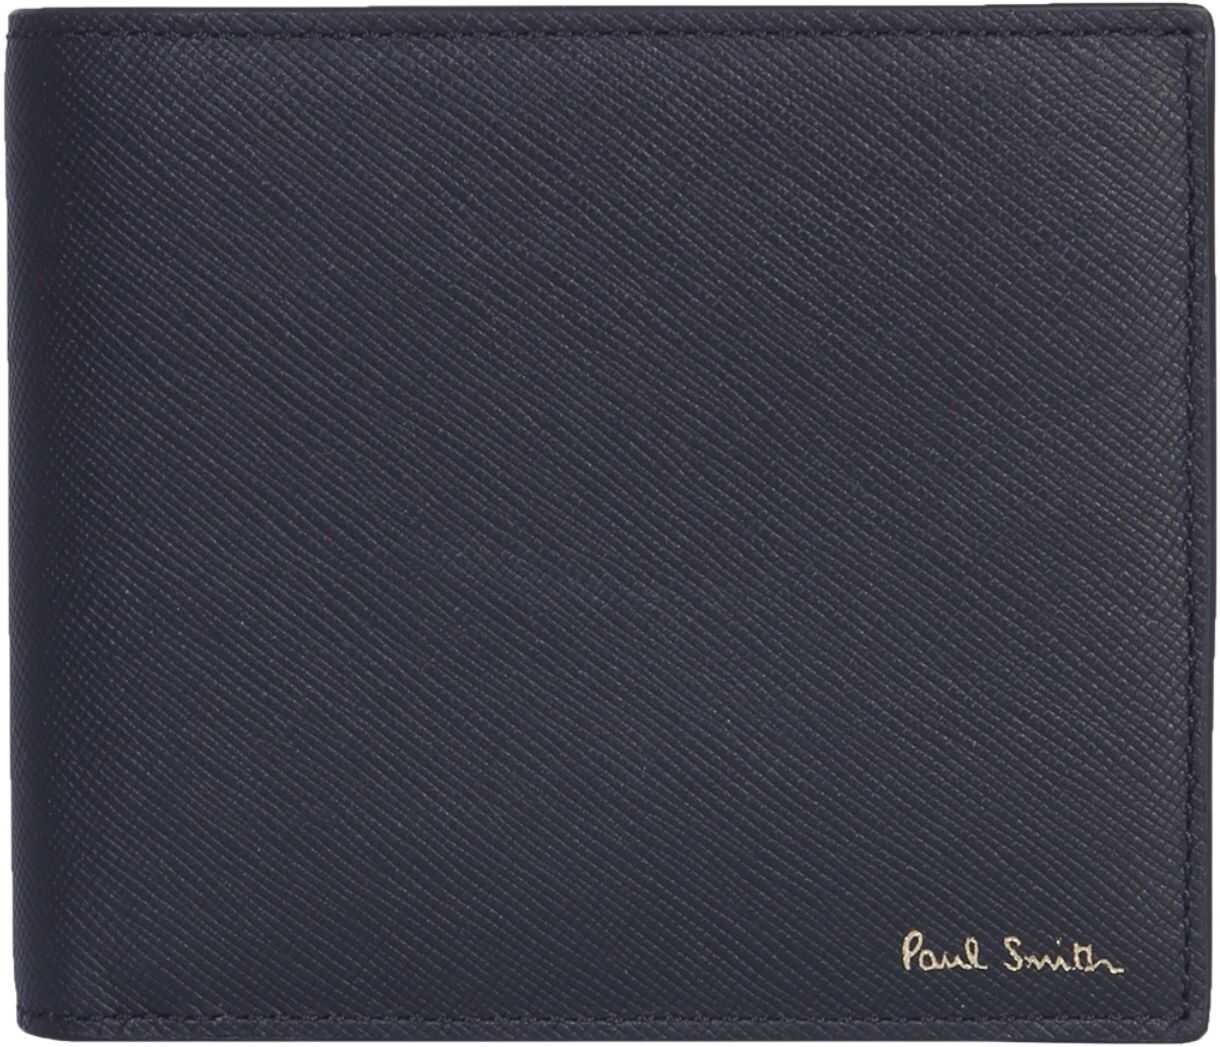 Paul Smith Leather Wallet BLACK